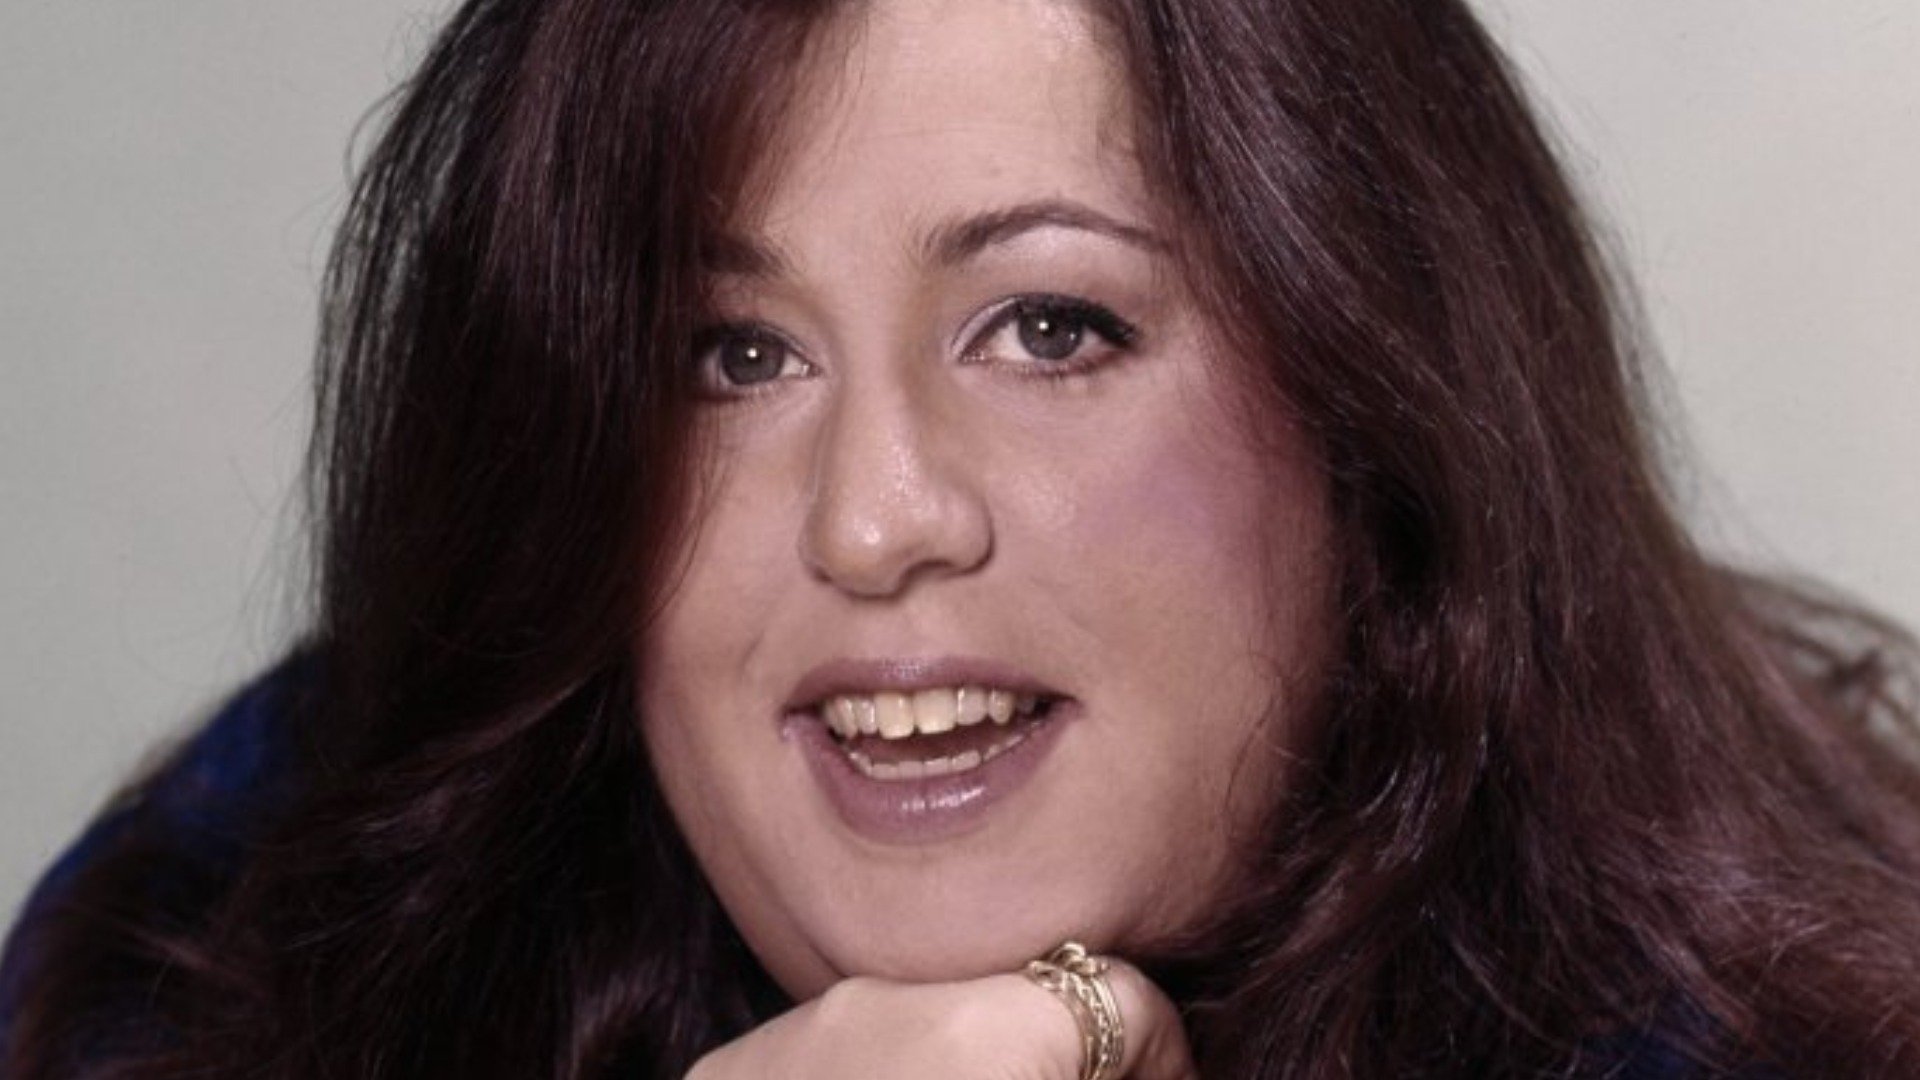 The Tragic Death Of The Mamas And The Papas' Cass Elliot